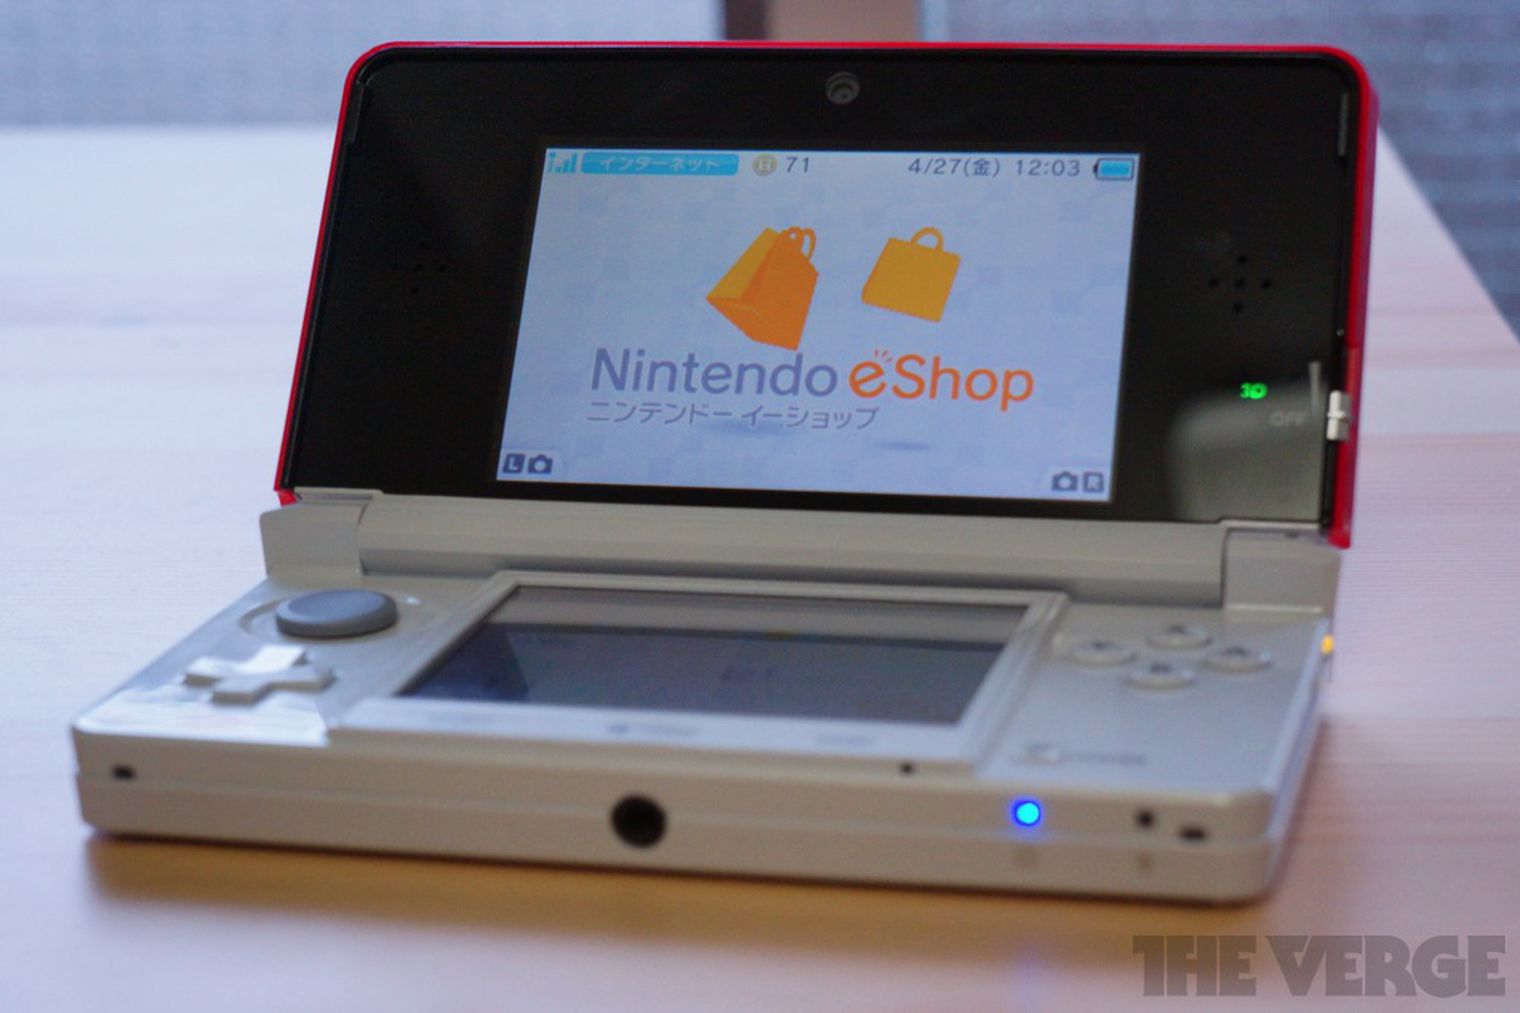 Nintendo are shutting down the Wii U and 3DS eShops in 42 countries